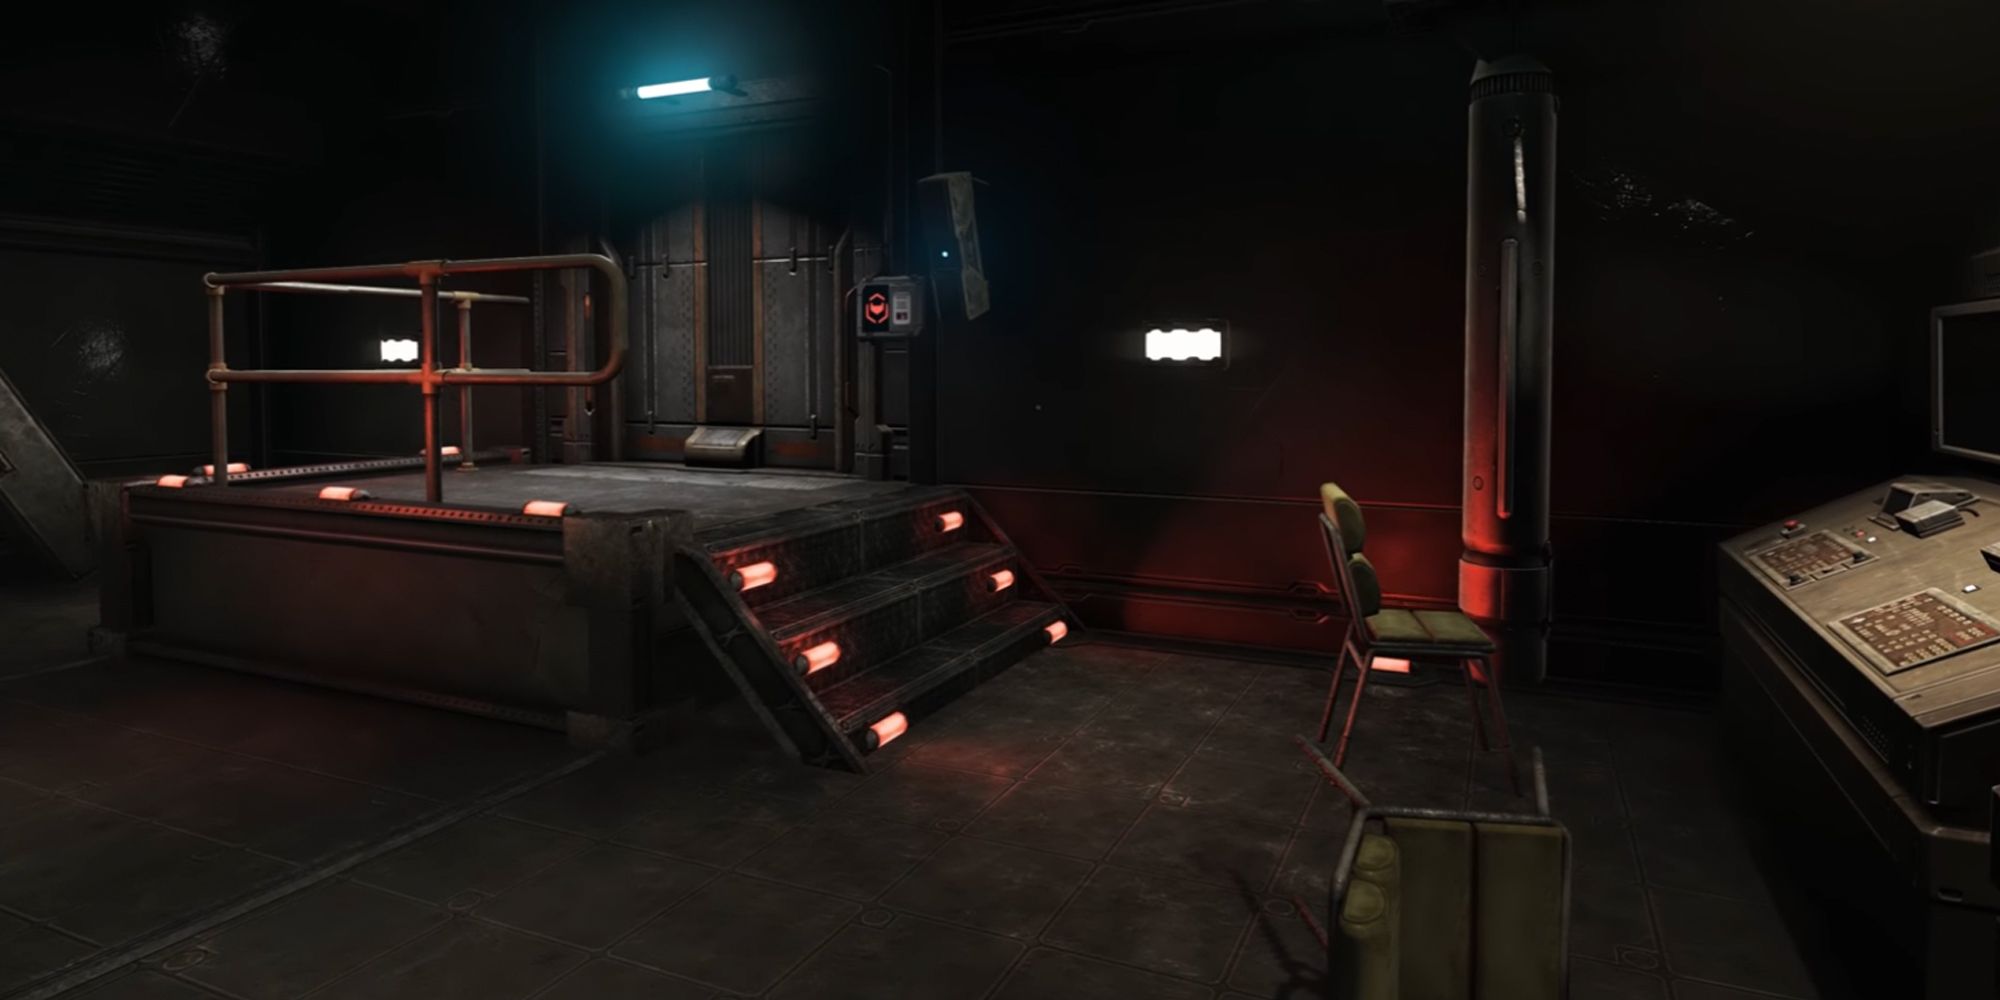 Soma protagonist facing a locked door. The room is dimly lit with faint red glows keeping the room visible.